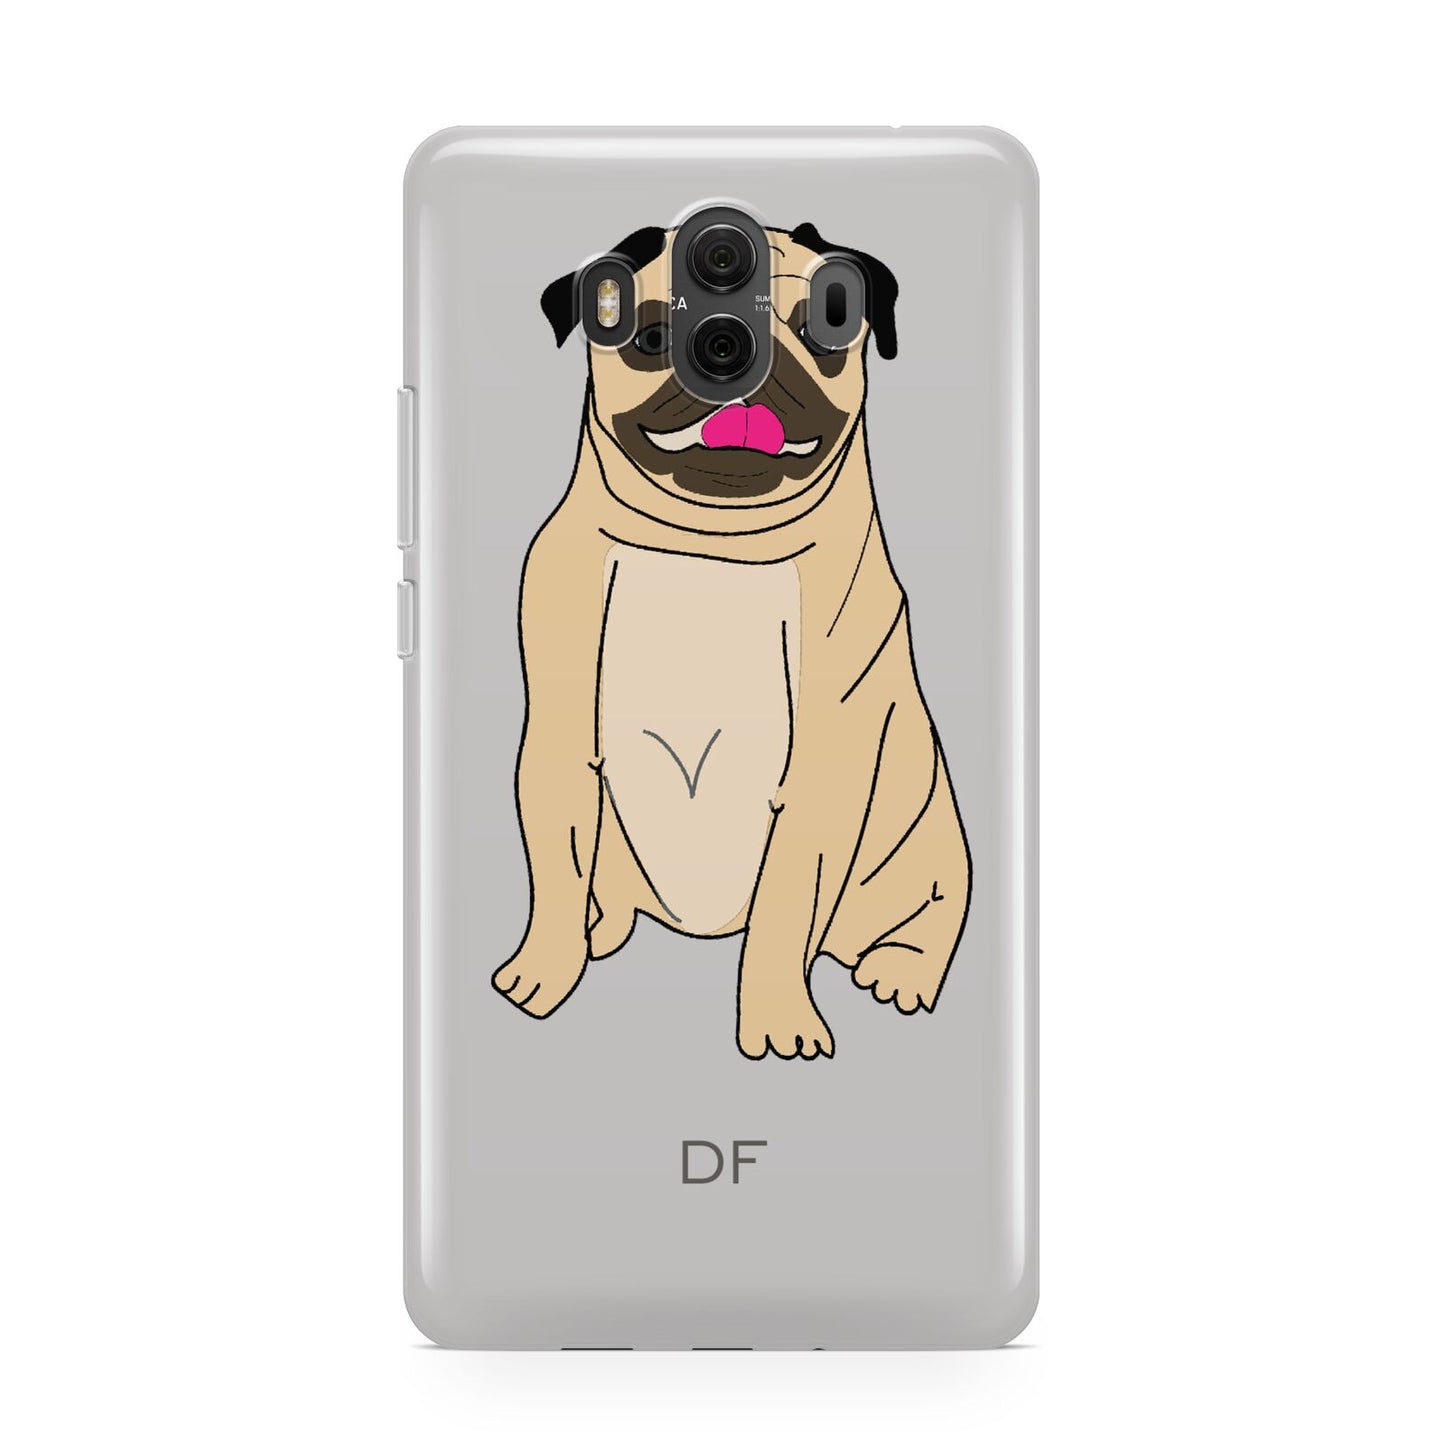 Personalised Initials Pug Huawei Mate 10 Protective Phone Case